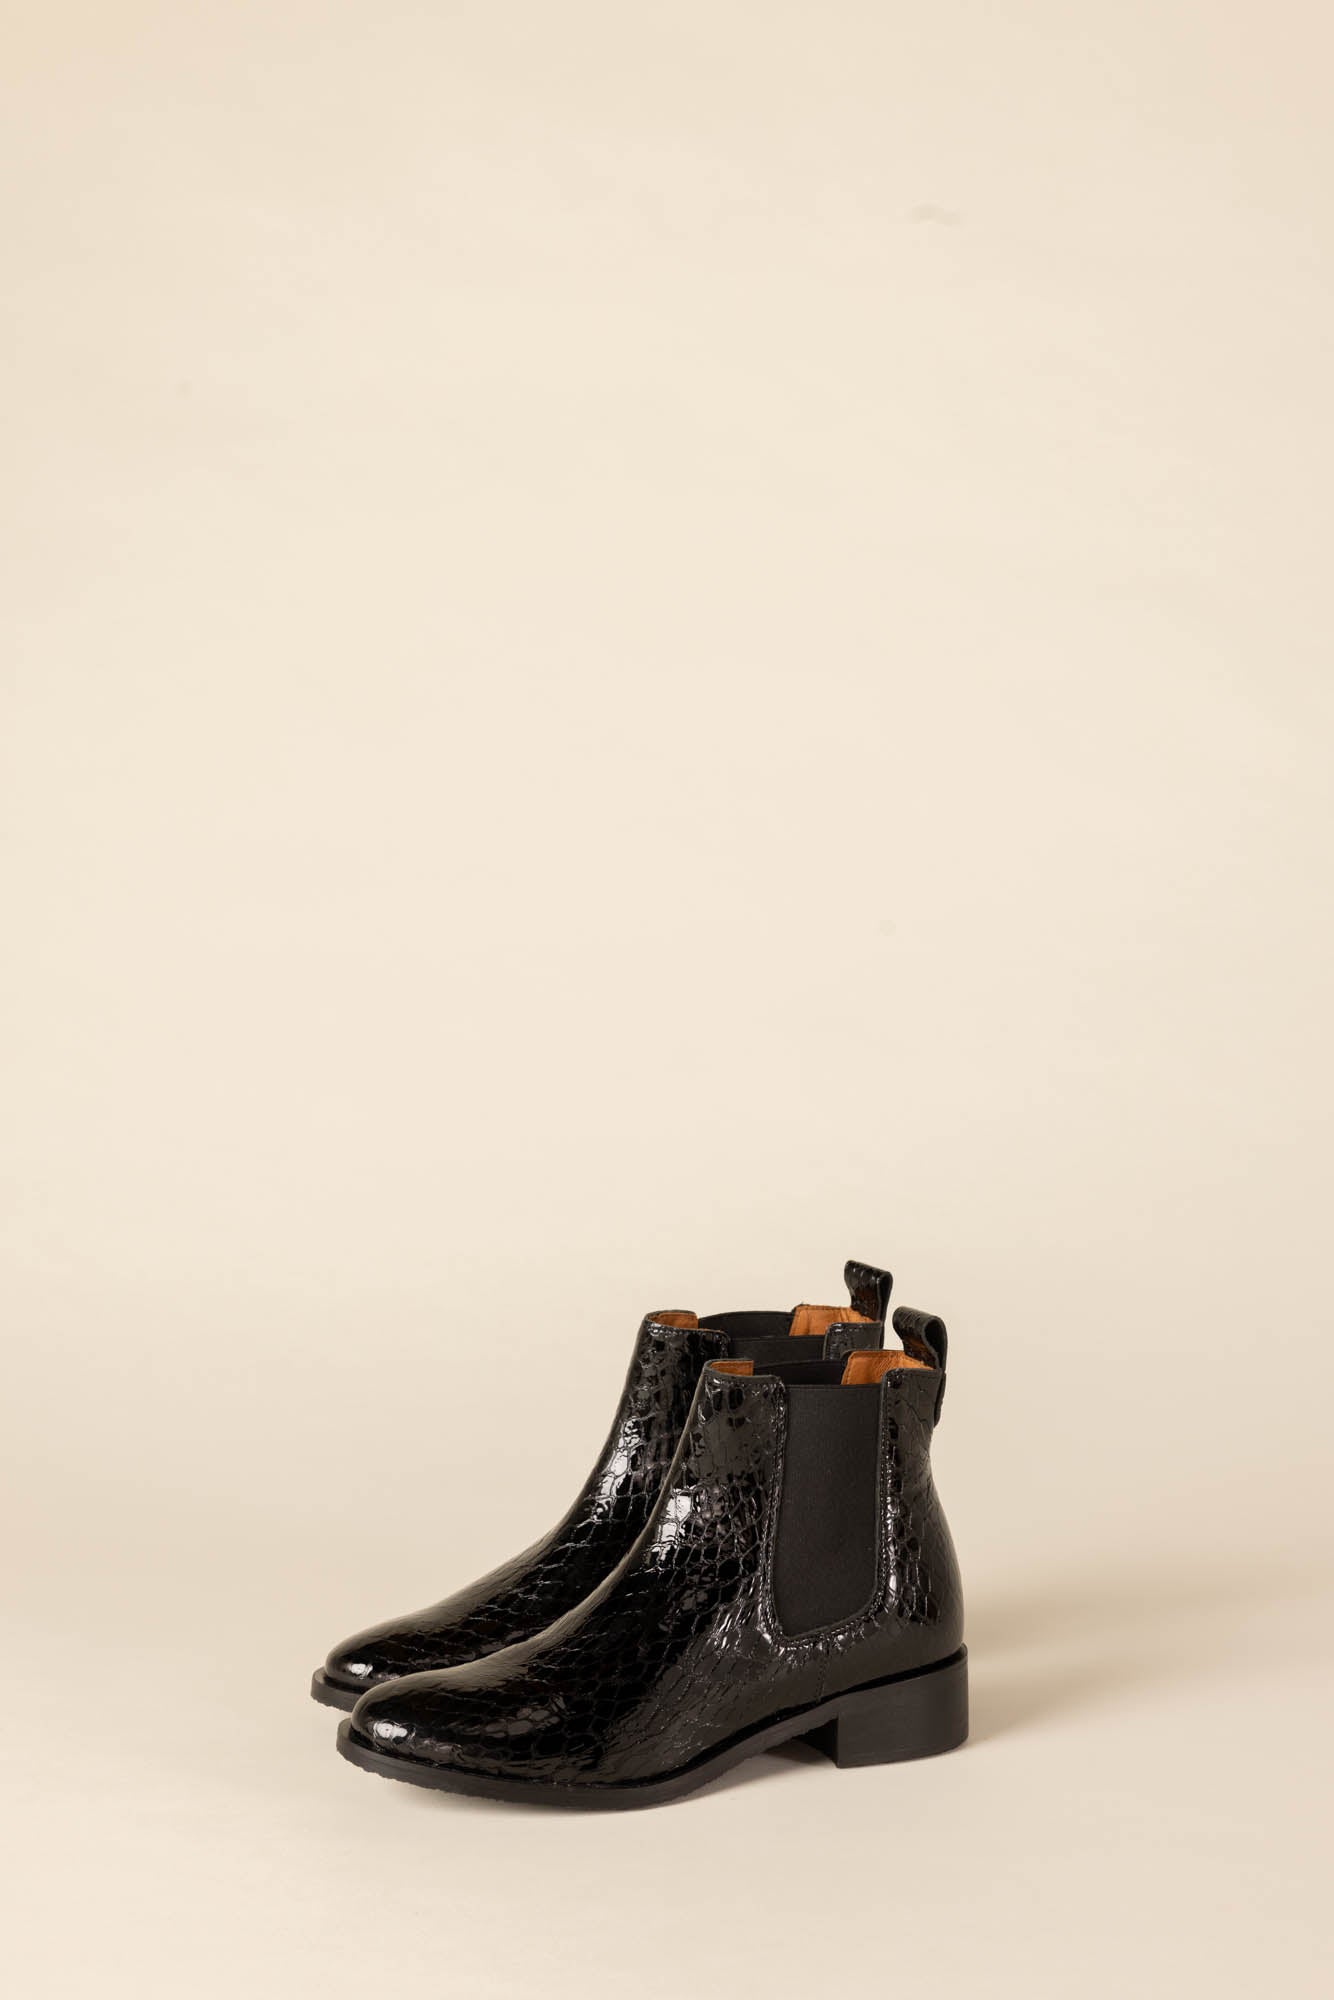 Josepha black embossed patent leather ankle boots